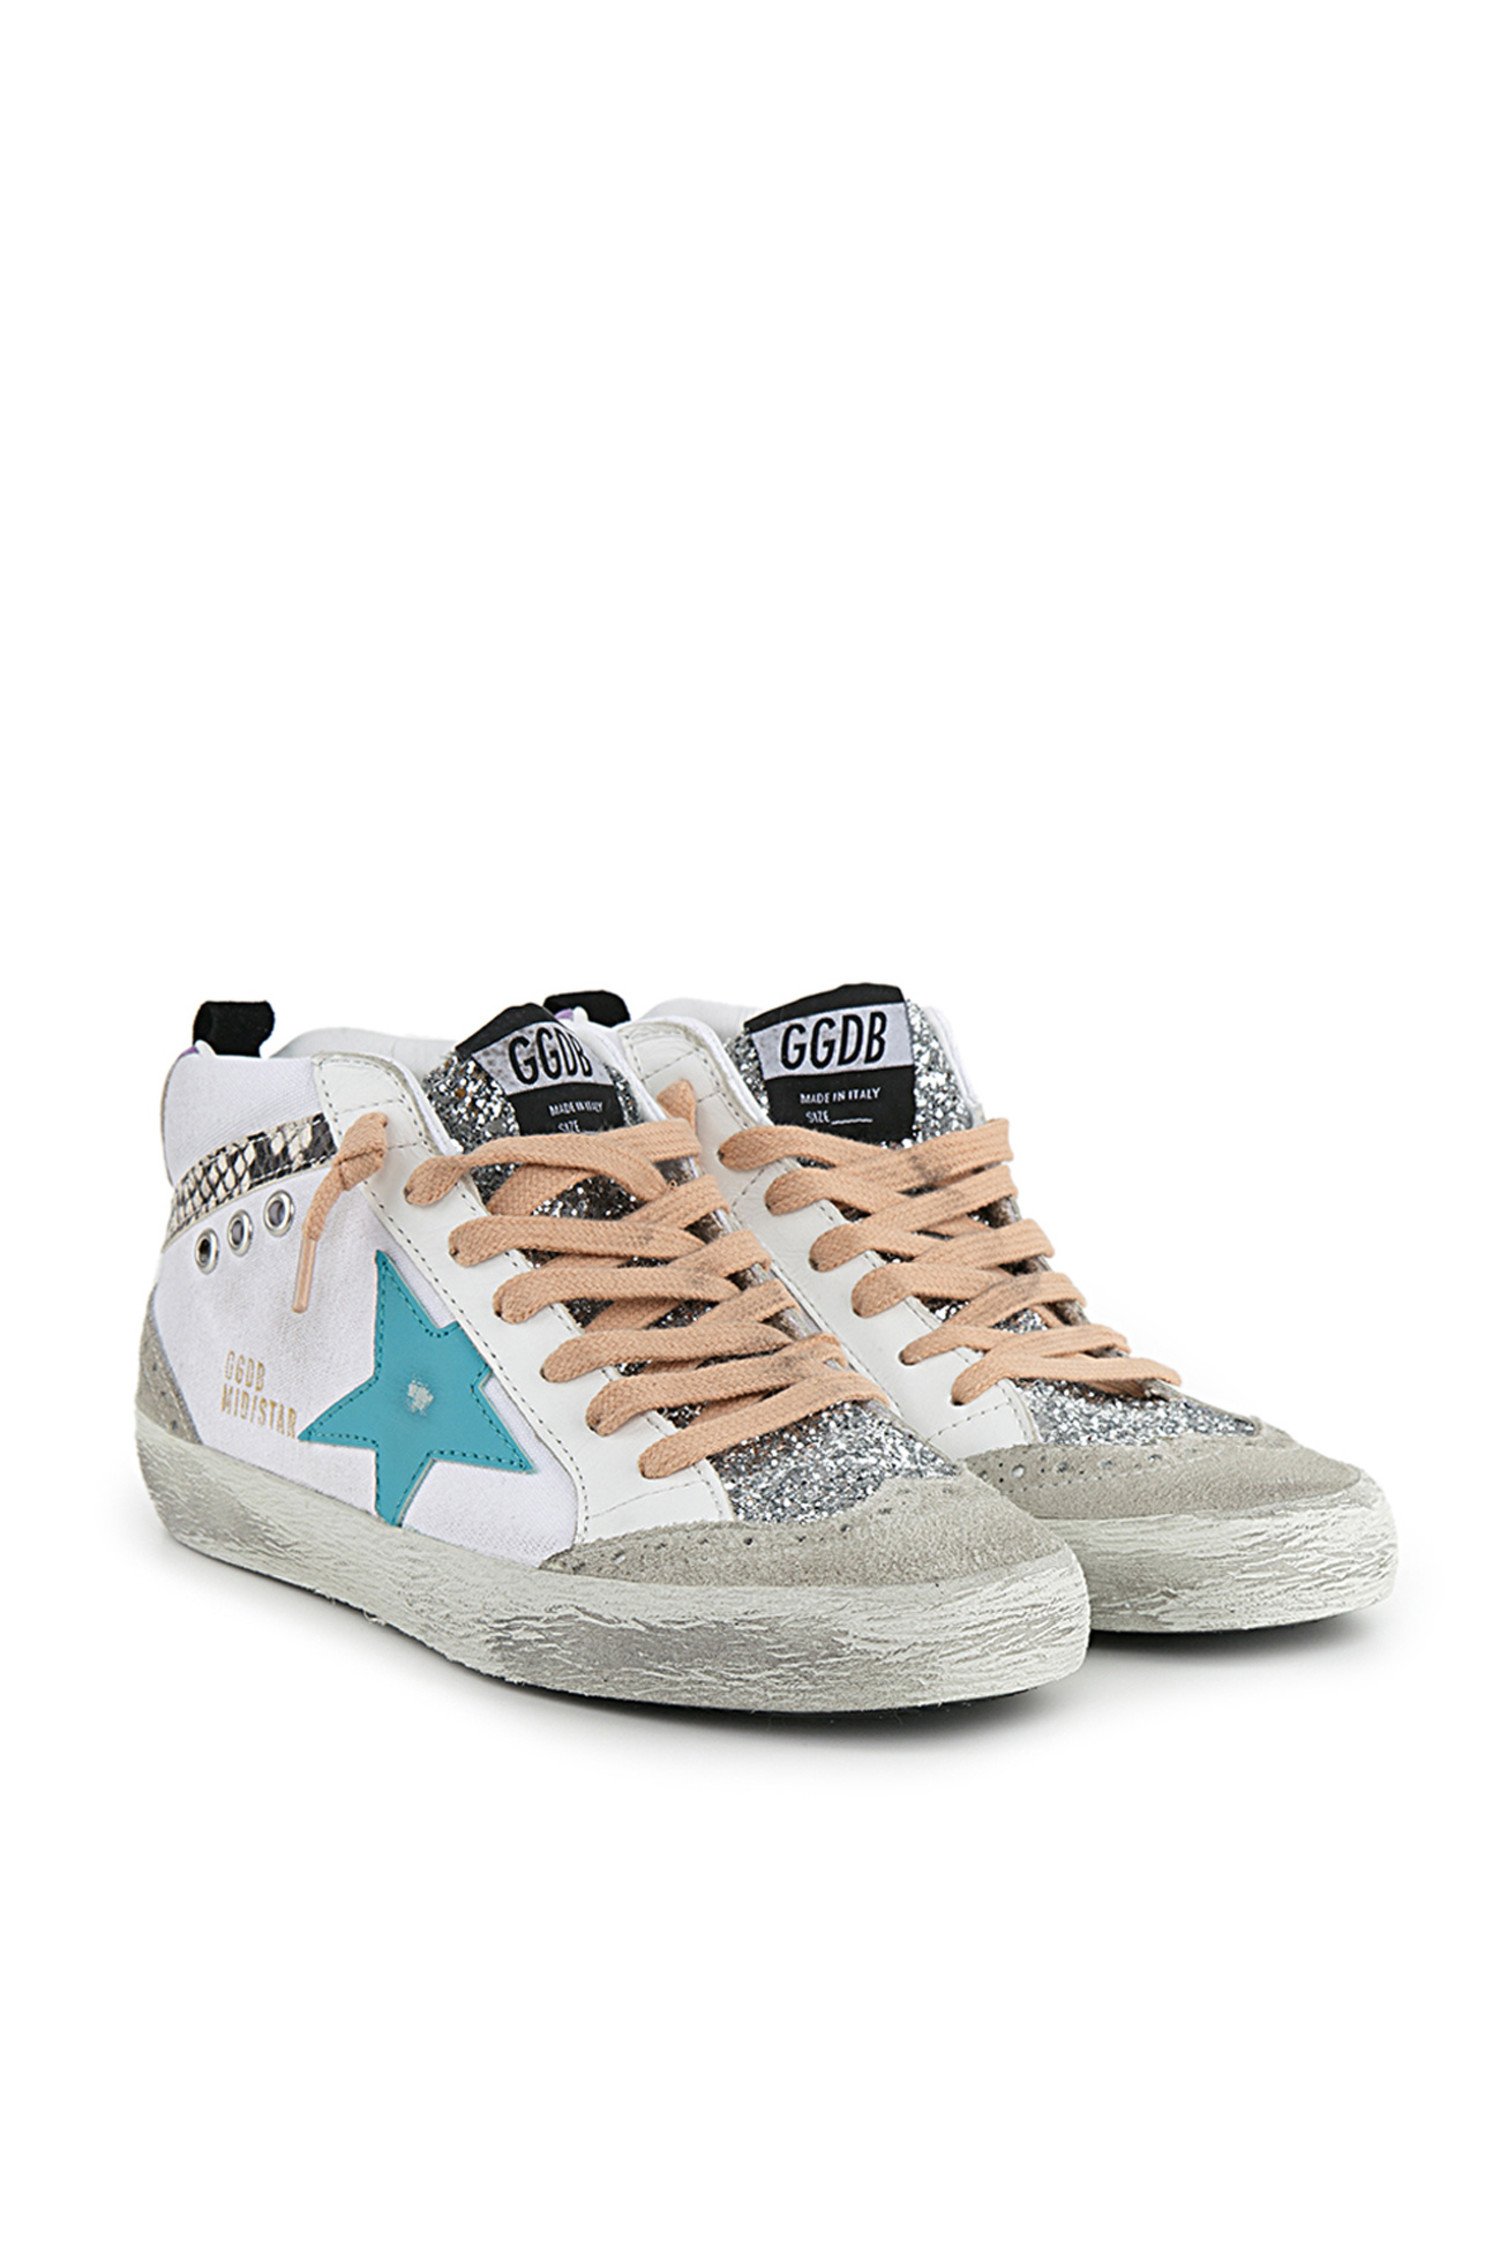 Golden Goose Mid Star Sneakers - The Fold